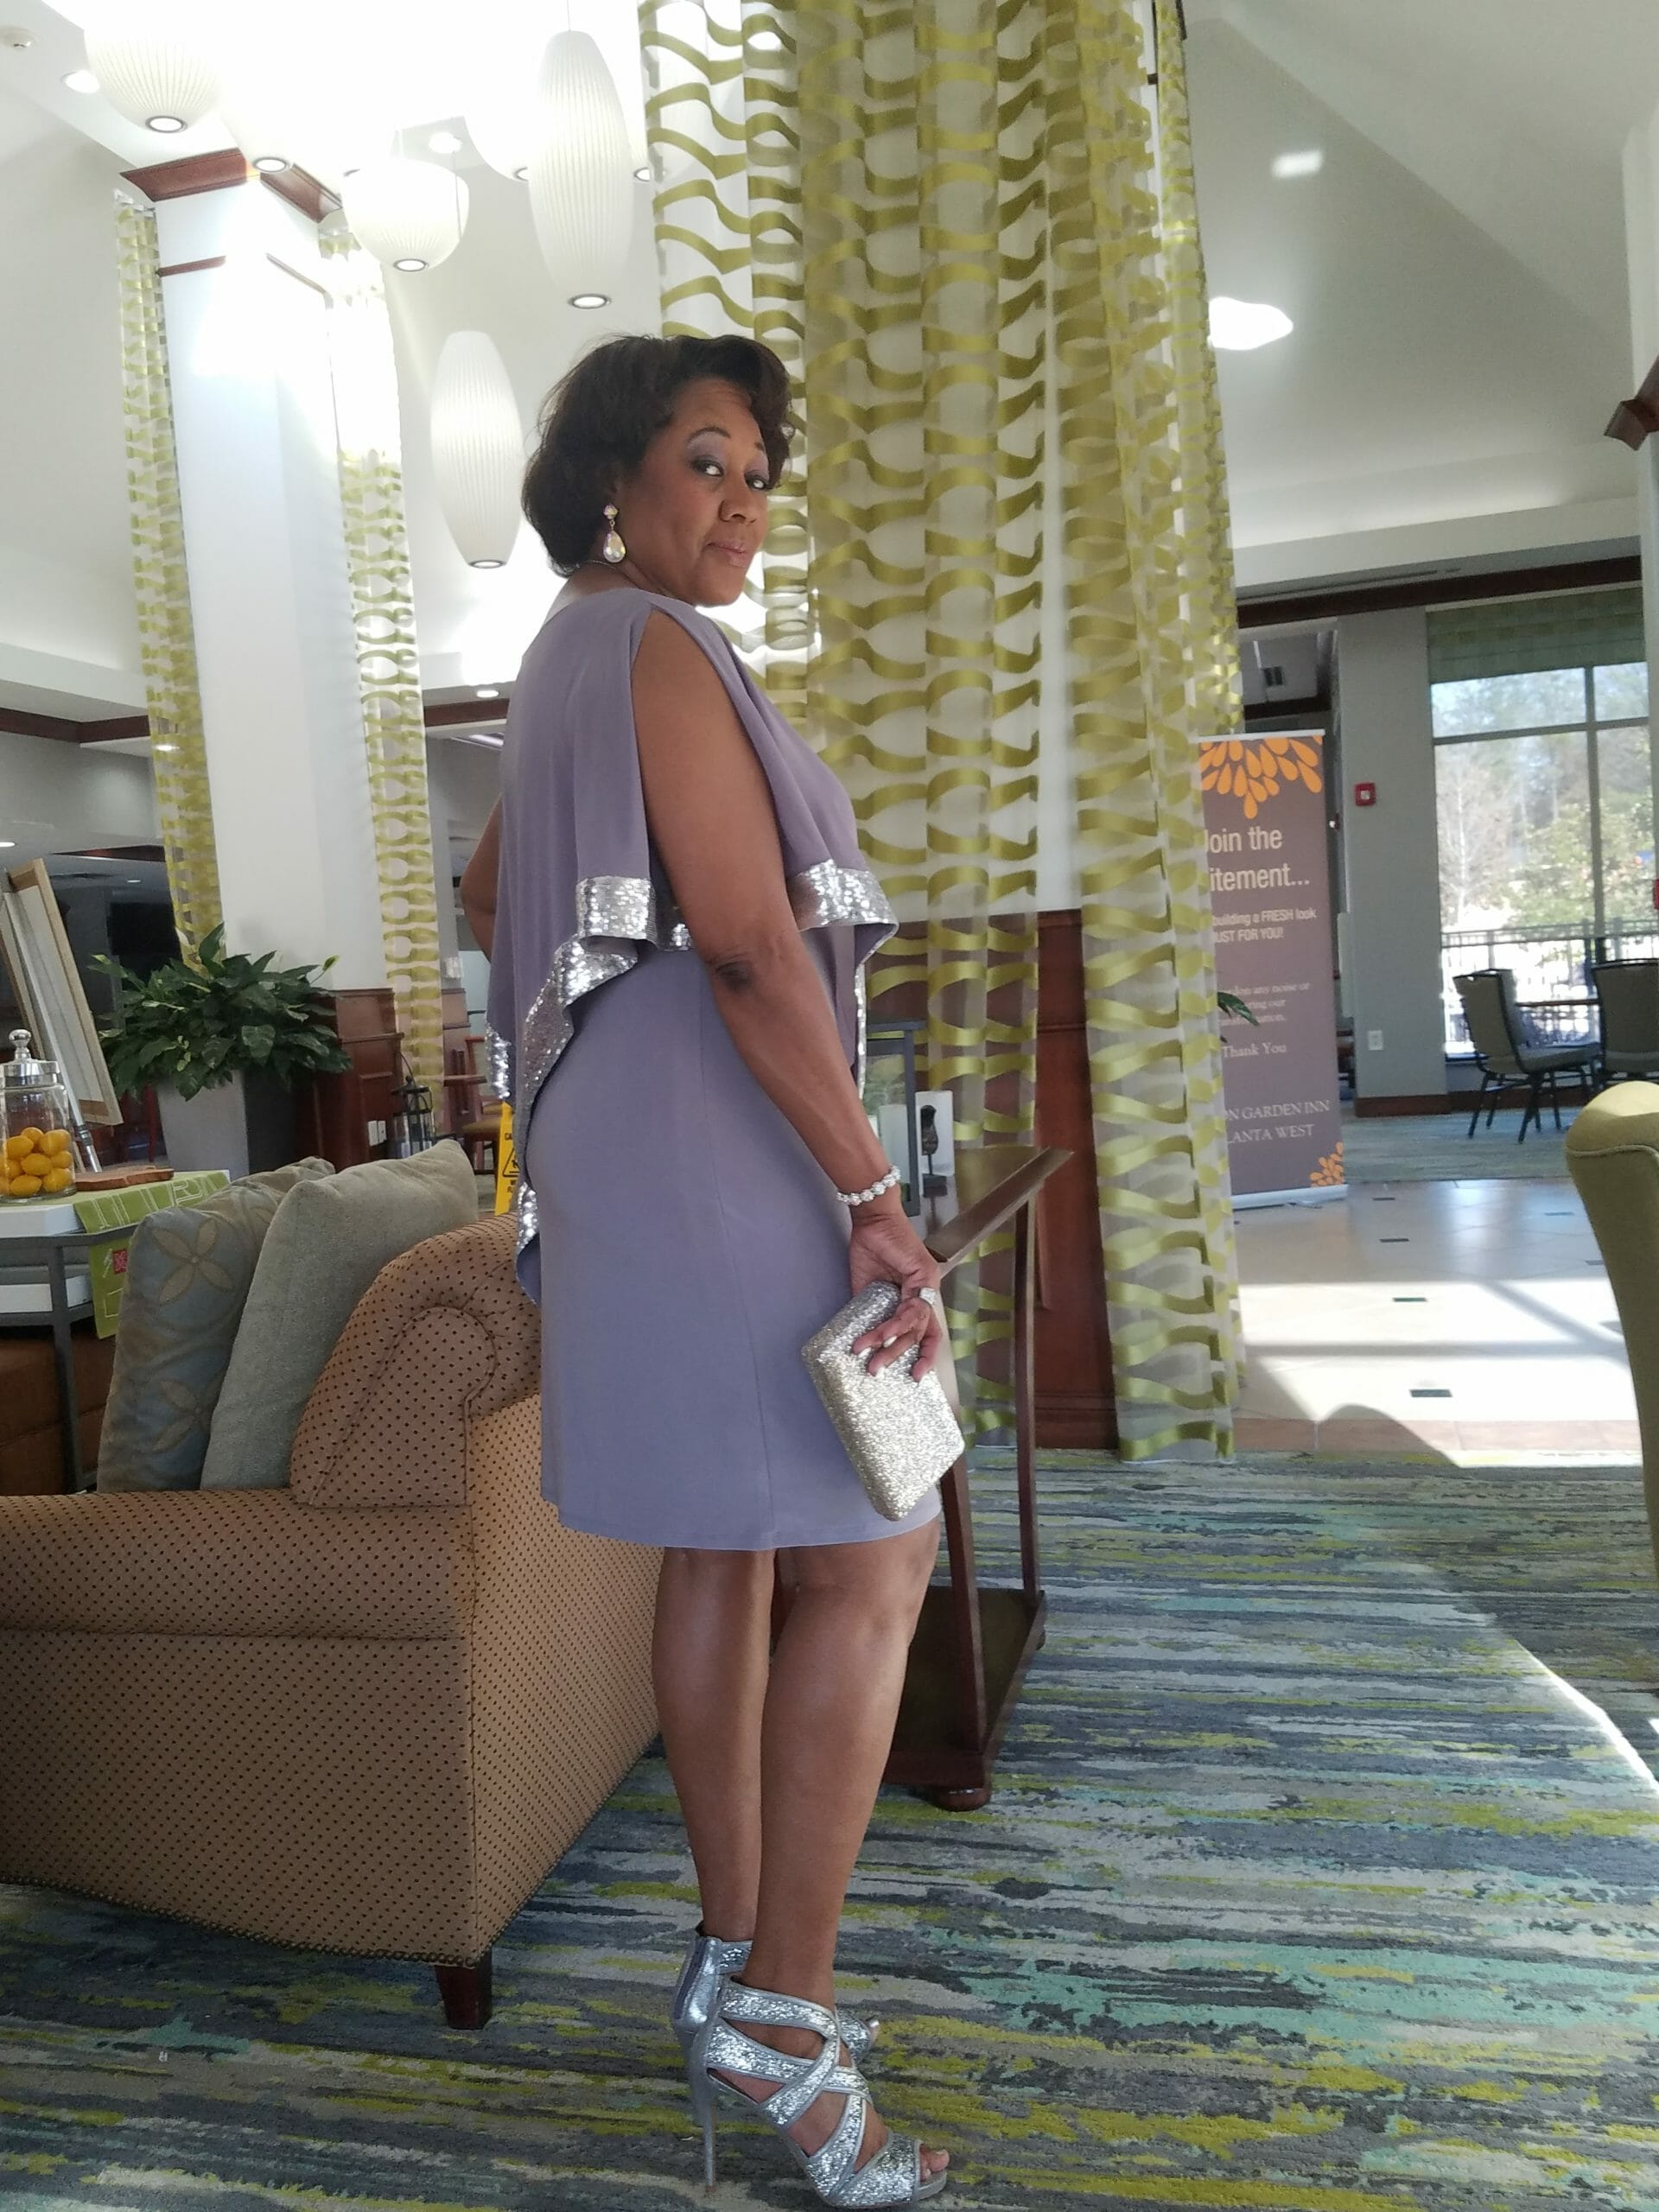 Side view of a Midnight Velvet customer, in a lavender dress with silver trim on the cape-like top, and silver sandals.